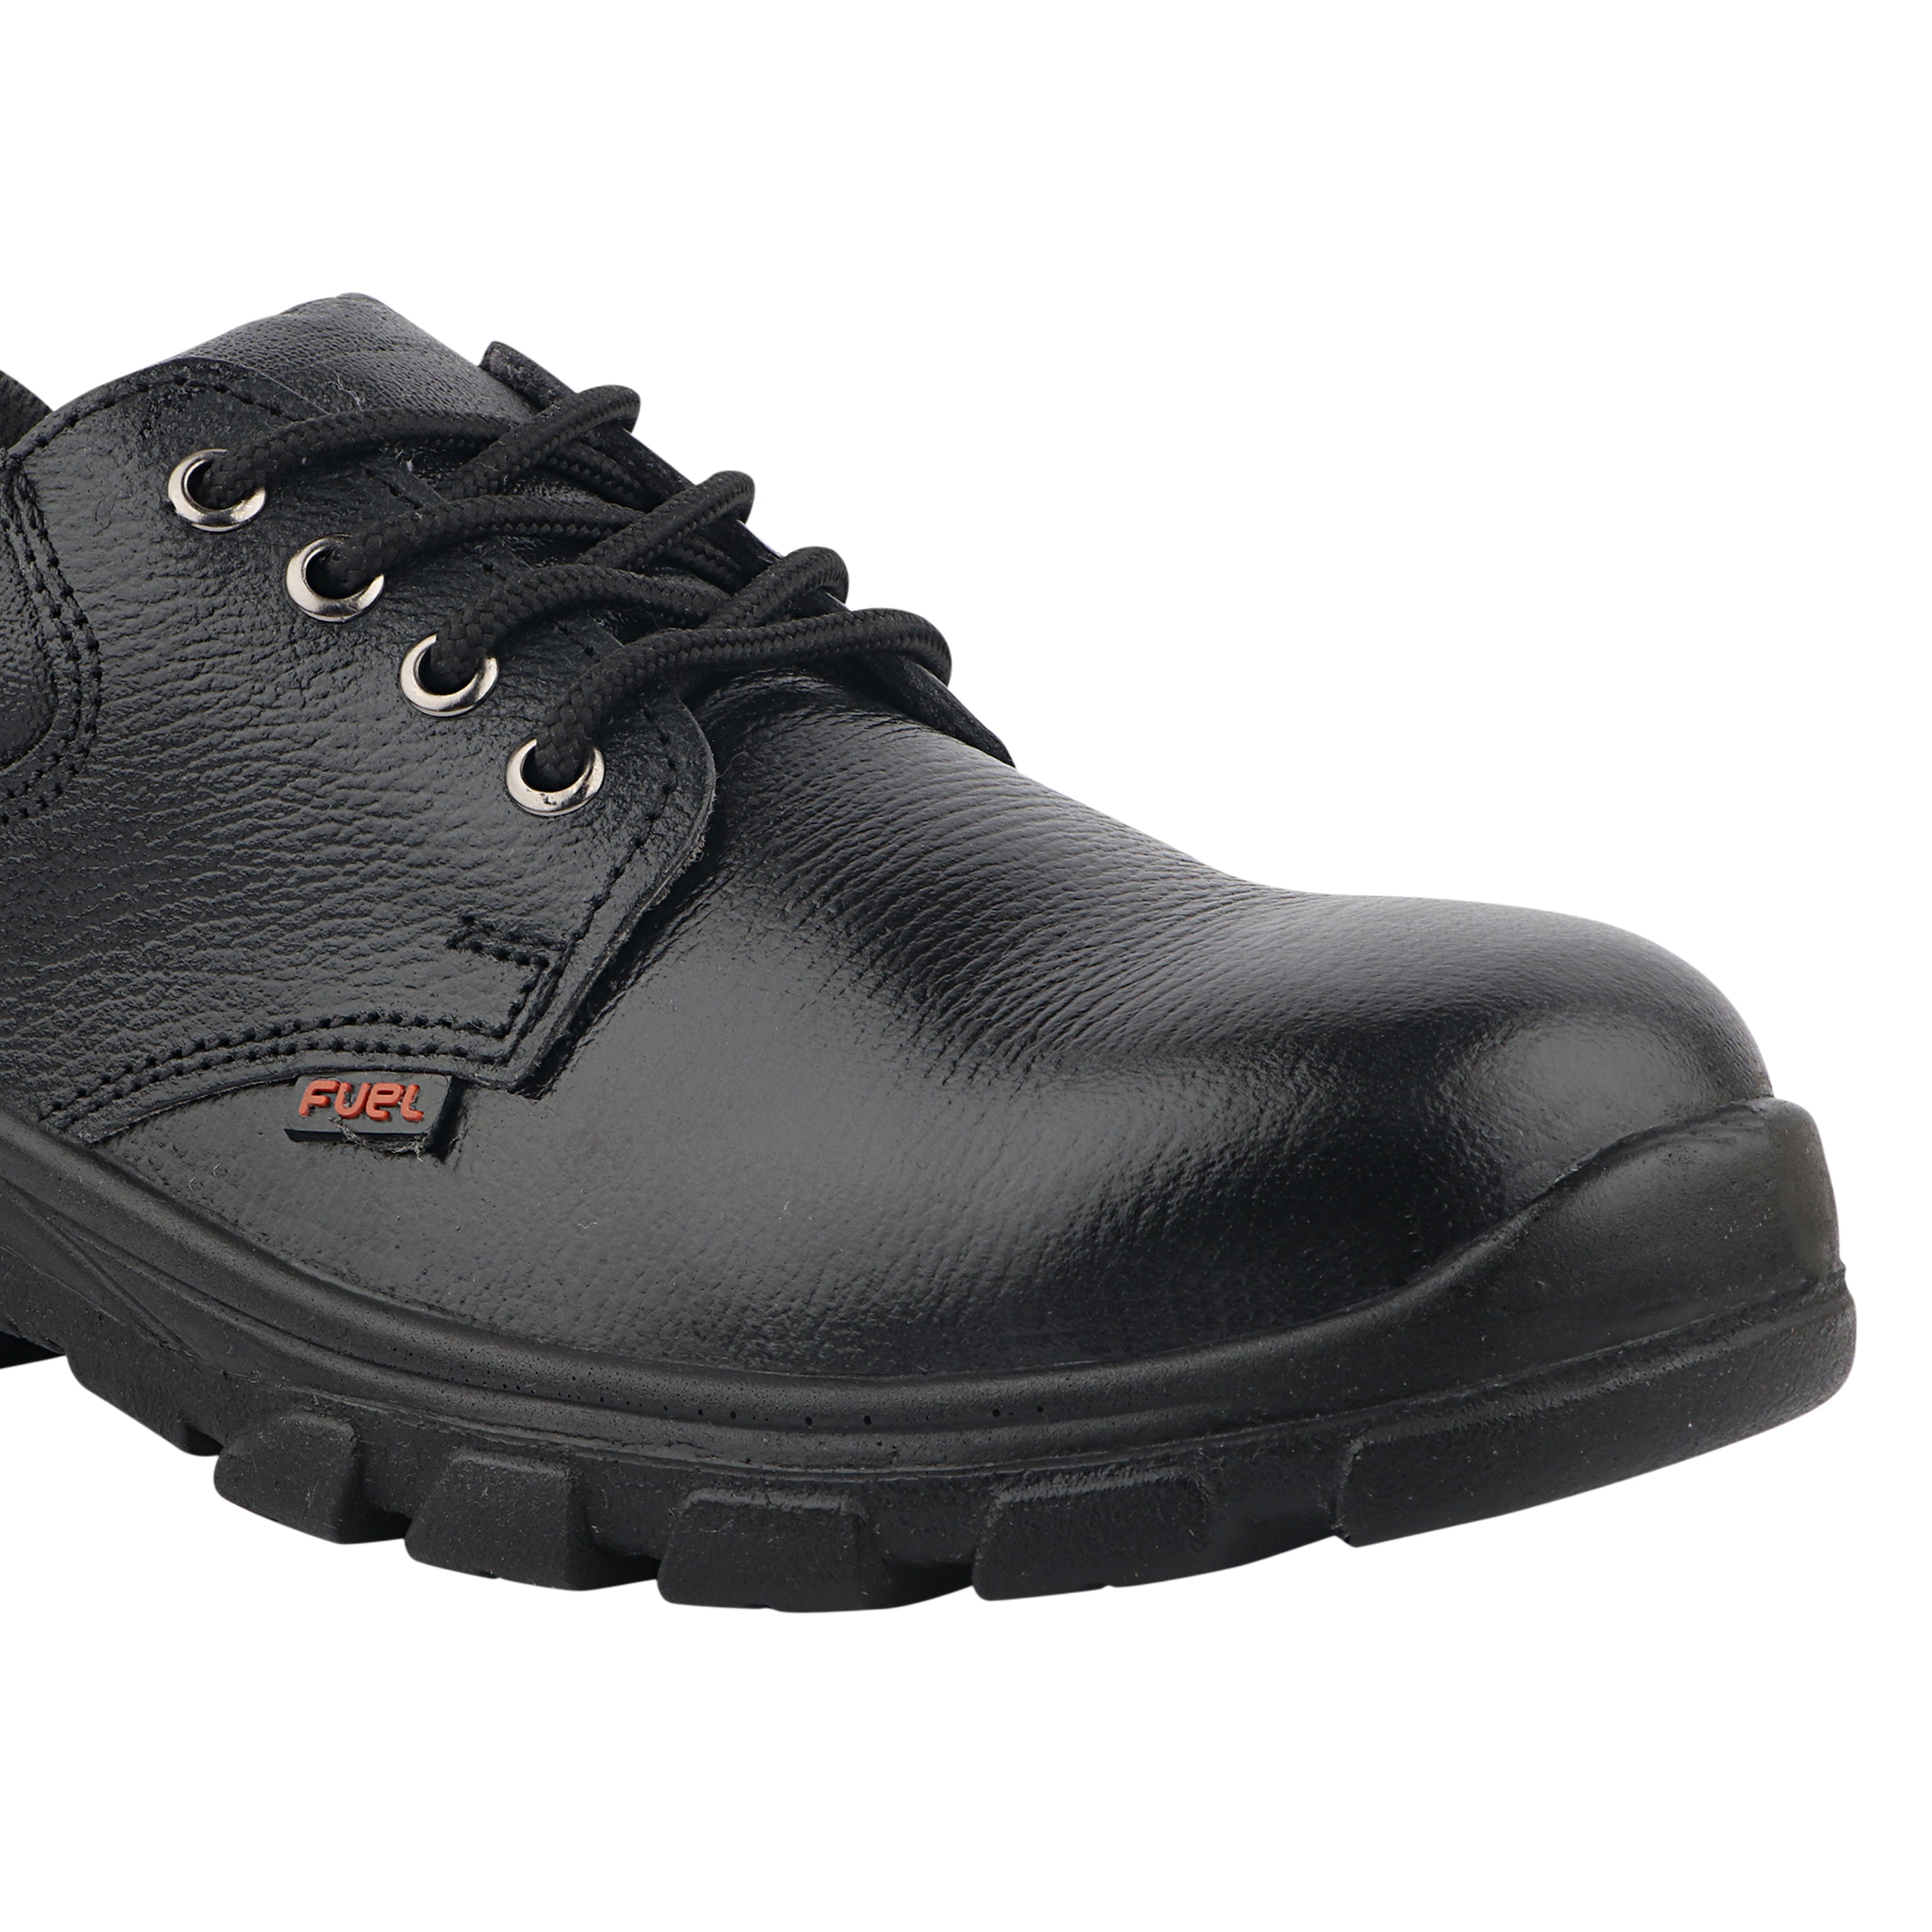 Fuel Spear Genuine Leather Safety Shoes for Men's Steel Toe Cap With Single Density PU Sole (Black)